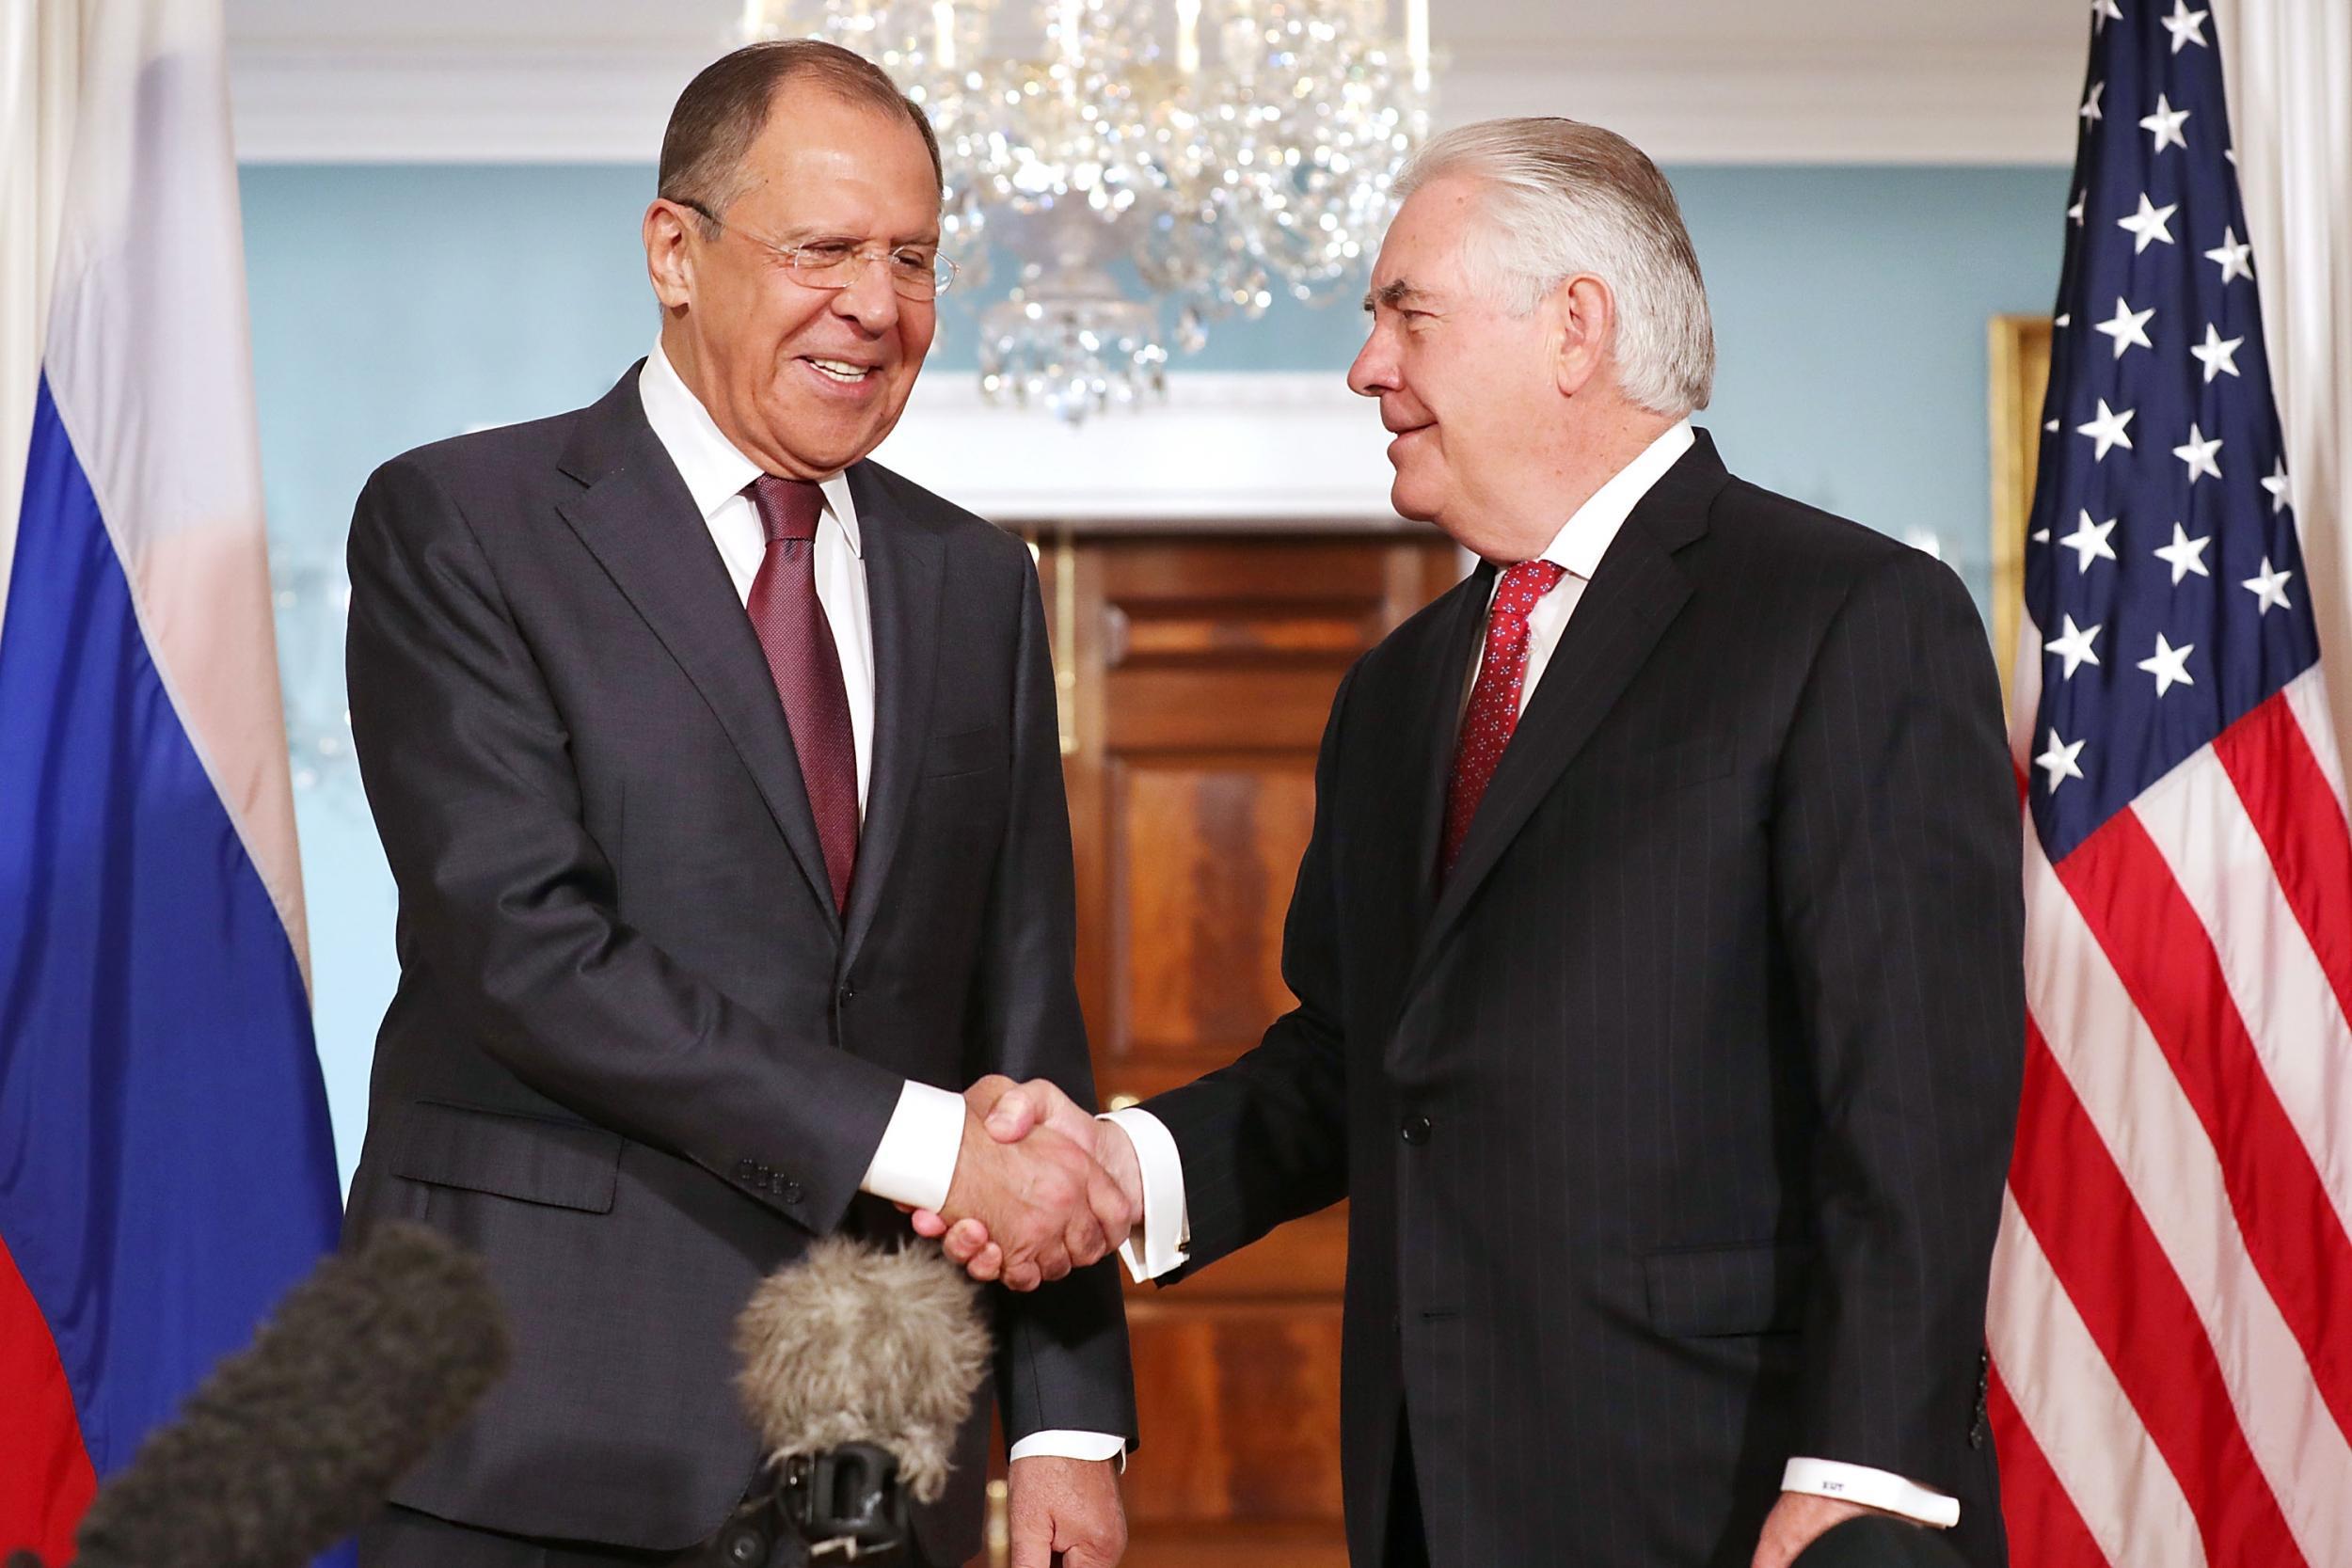 Russian Foreign Minister Sergey Lavrov and US Secretary of State Rex Tillerson shake hands in the Treaty Room before heading into meetings at the State Department